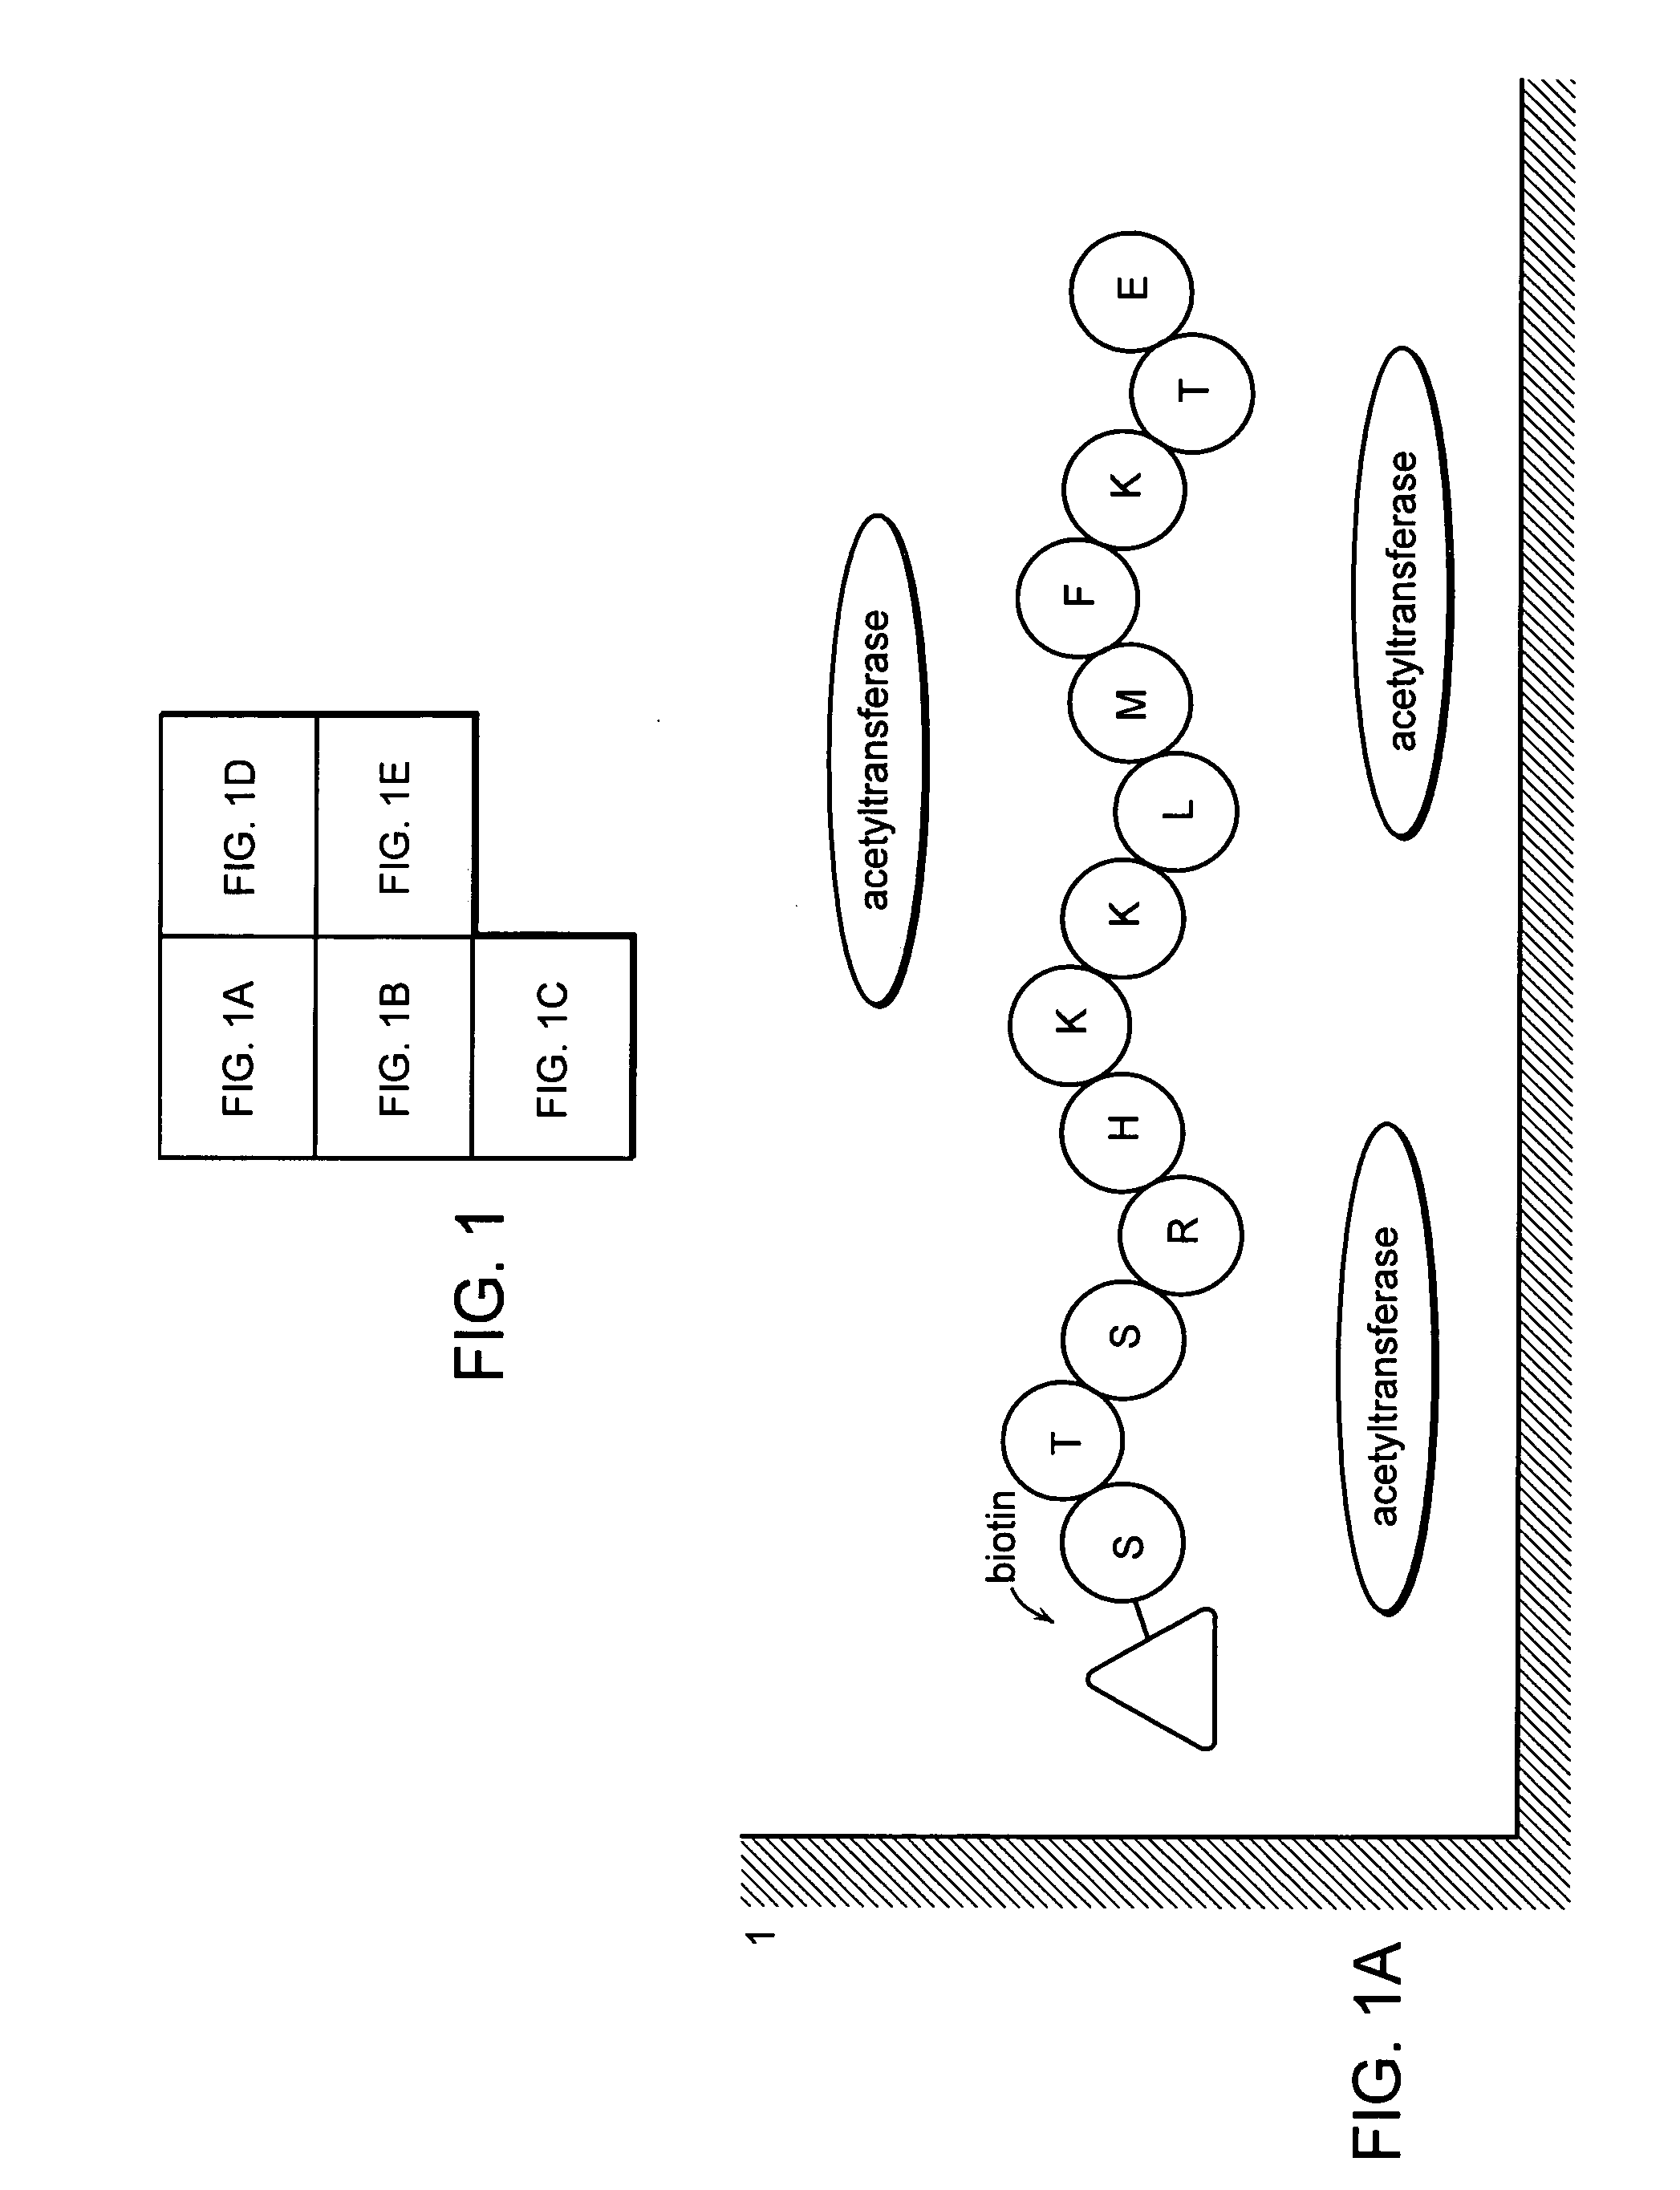 Method for detecting acetyltransferase and deacetylase activities and method for screening inhibitors or enhancers of these enzymes